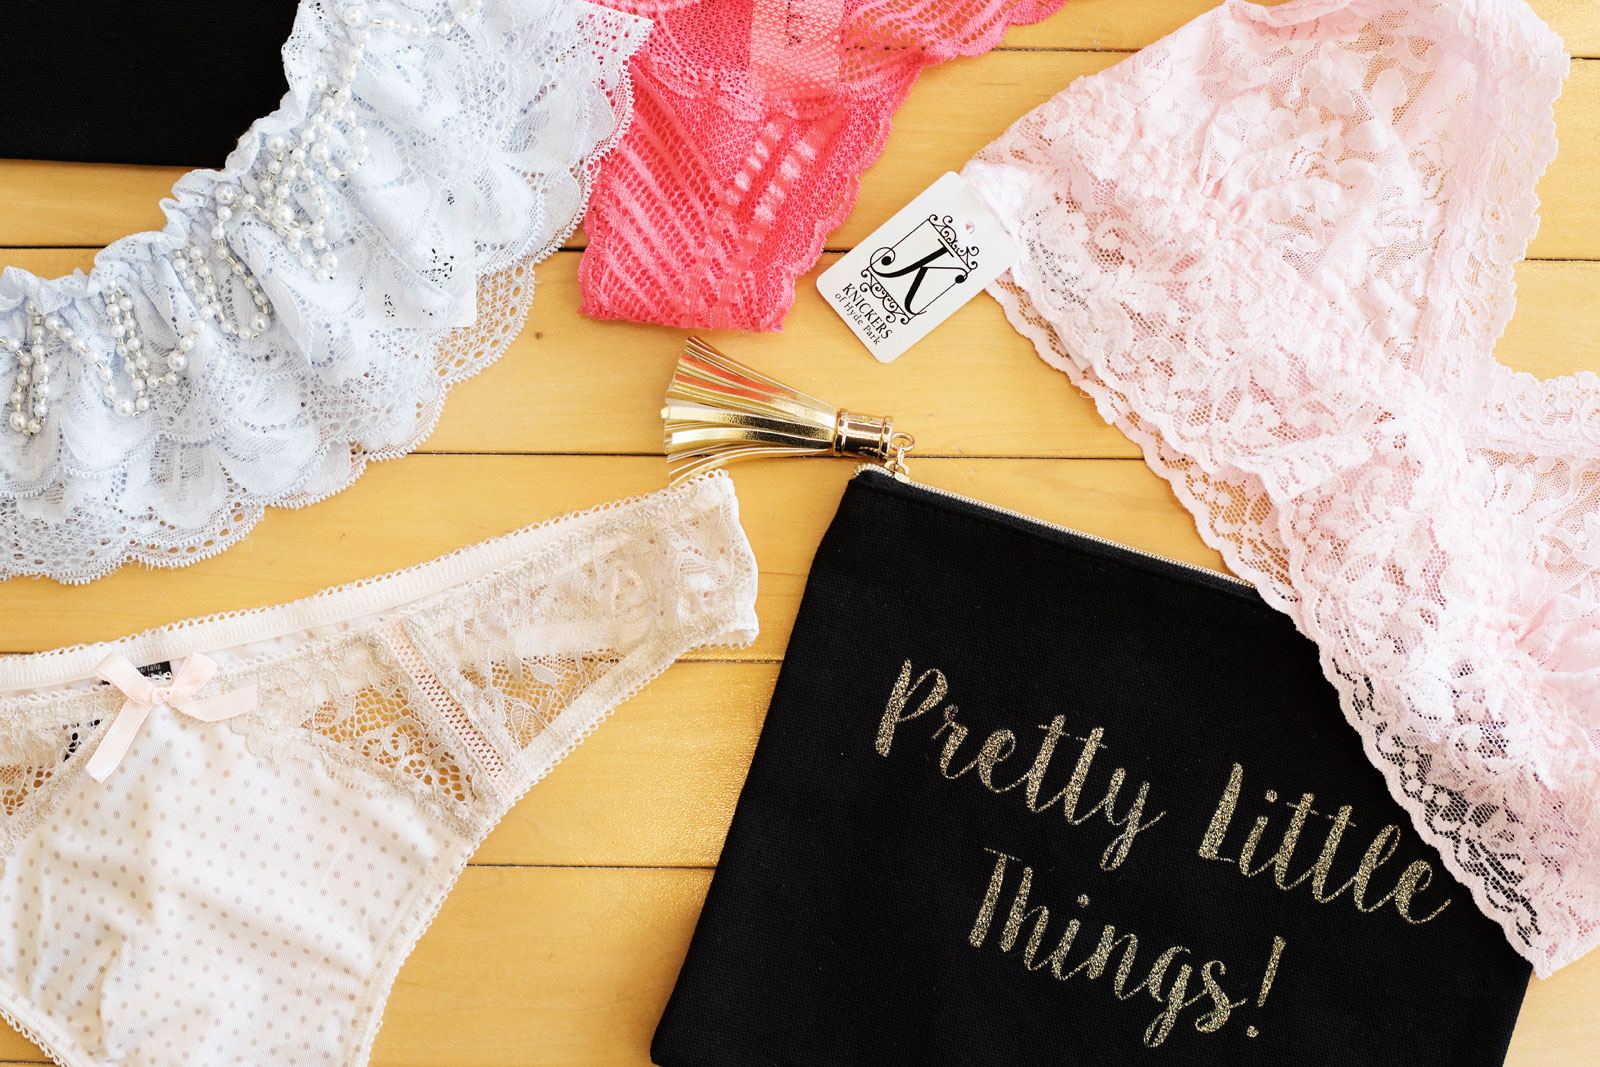 Best Lingerie That's Both Classy and Sexy 2018, Knickers of Hyde Park, Shops & Services